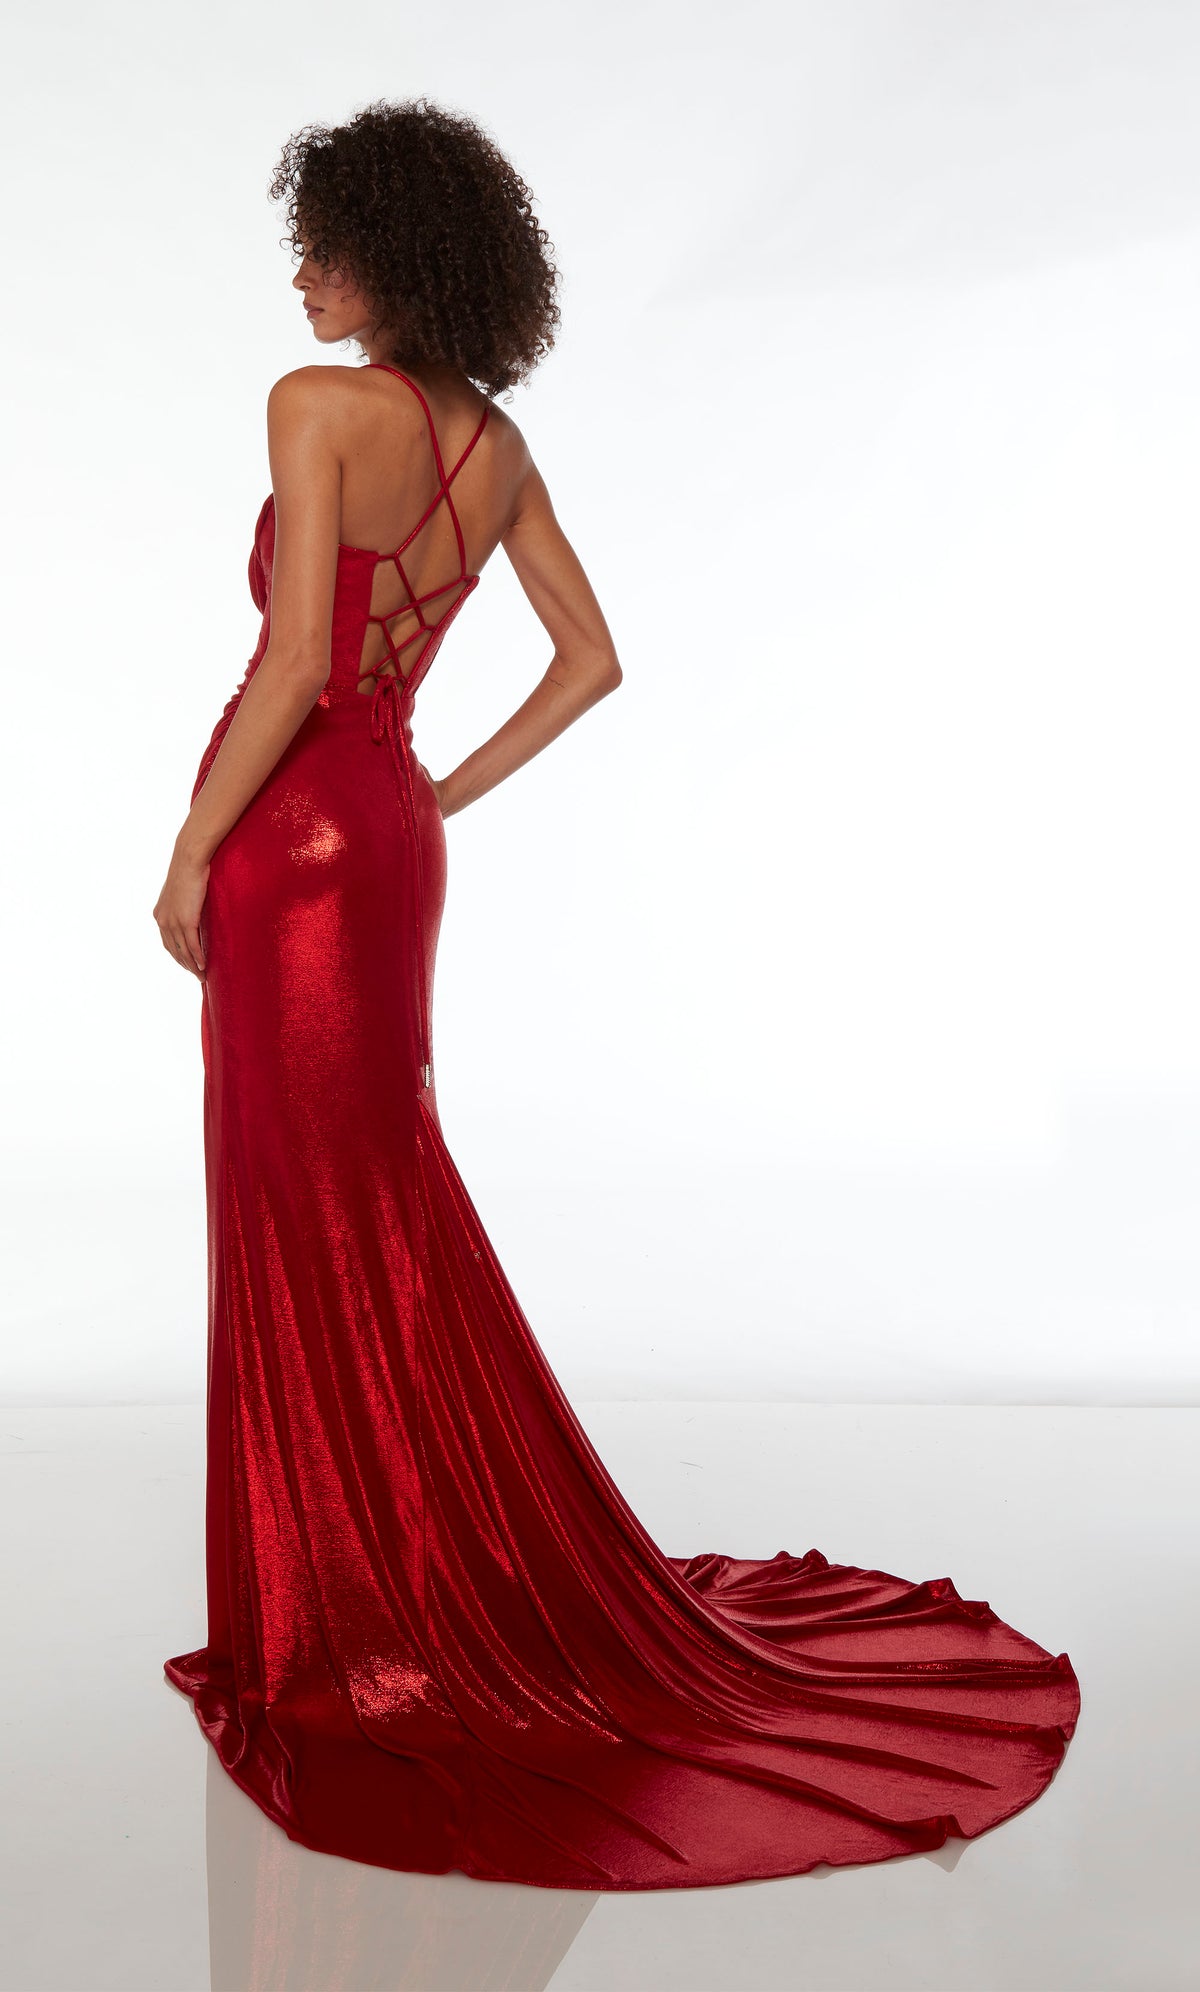 Red unique prom dress featuring an sweetheart-cowl neckline, corset top, high slit, lace-up back, and train, crafted in an metallic stretch fabric.